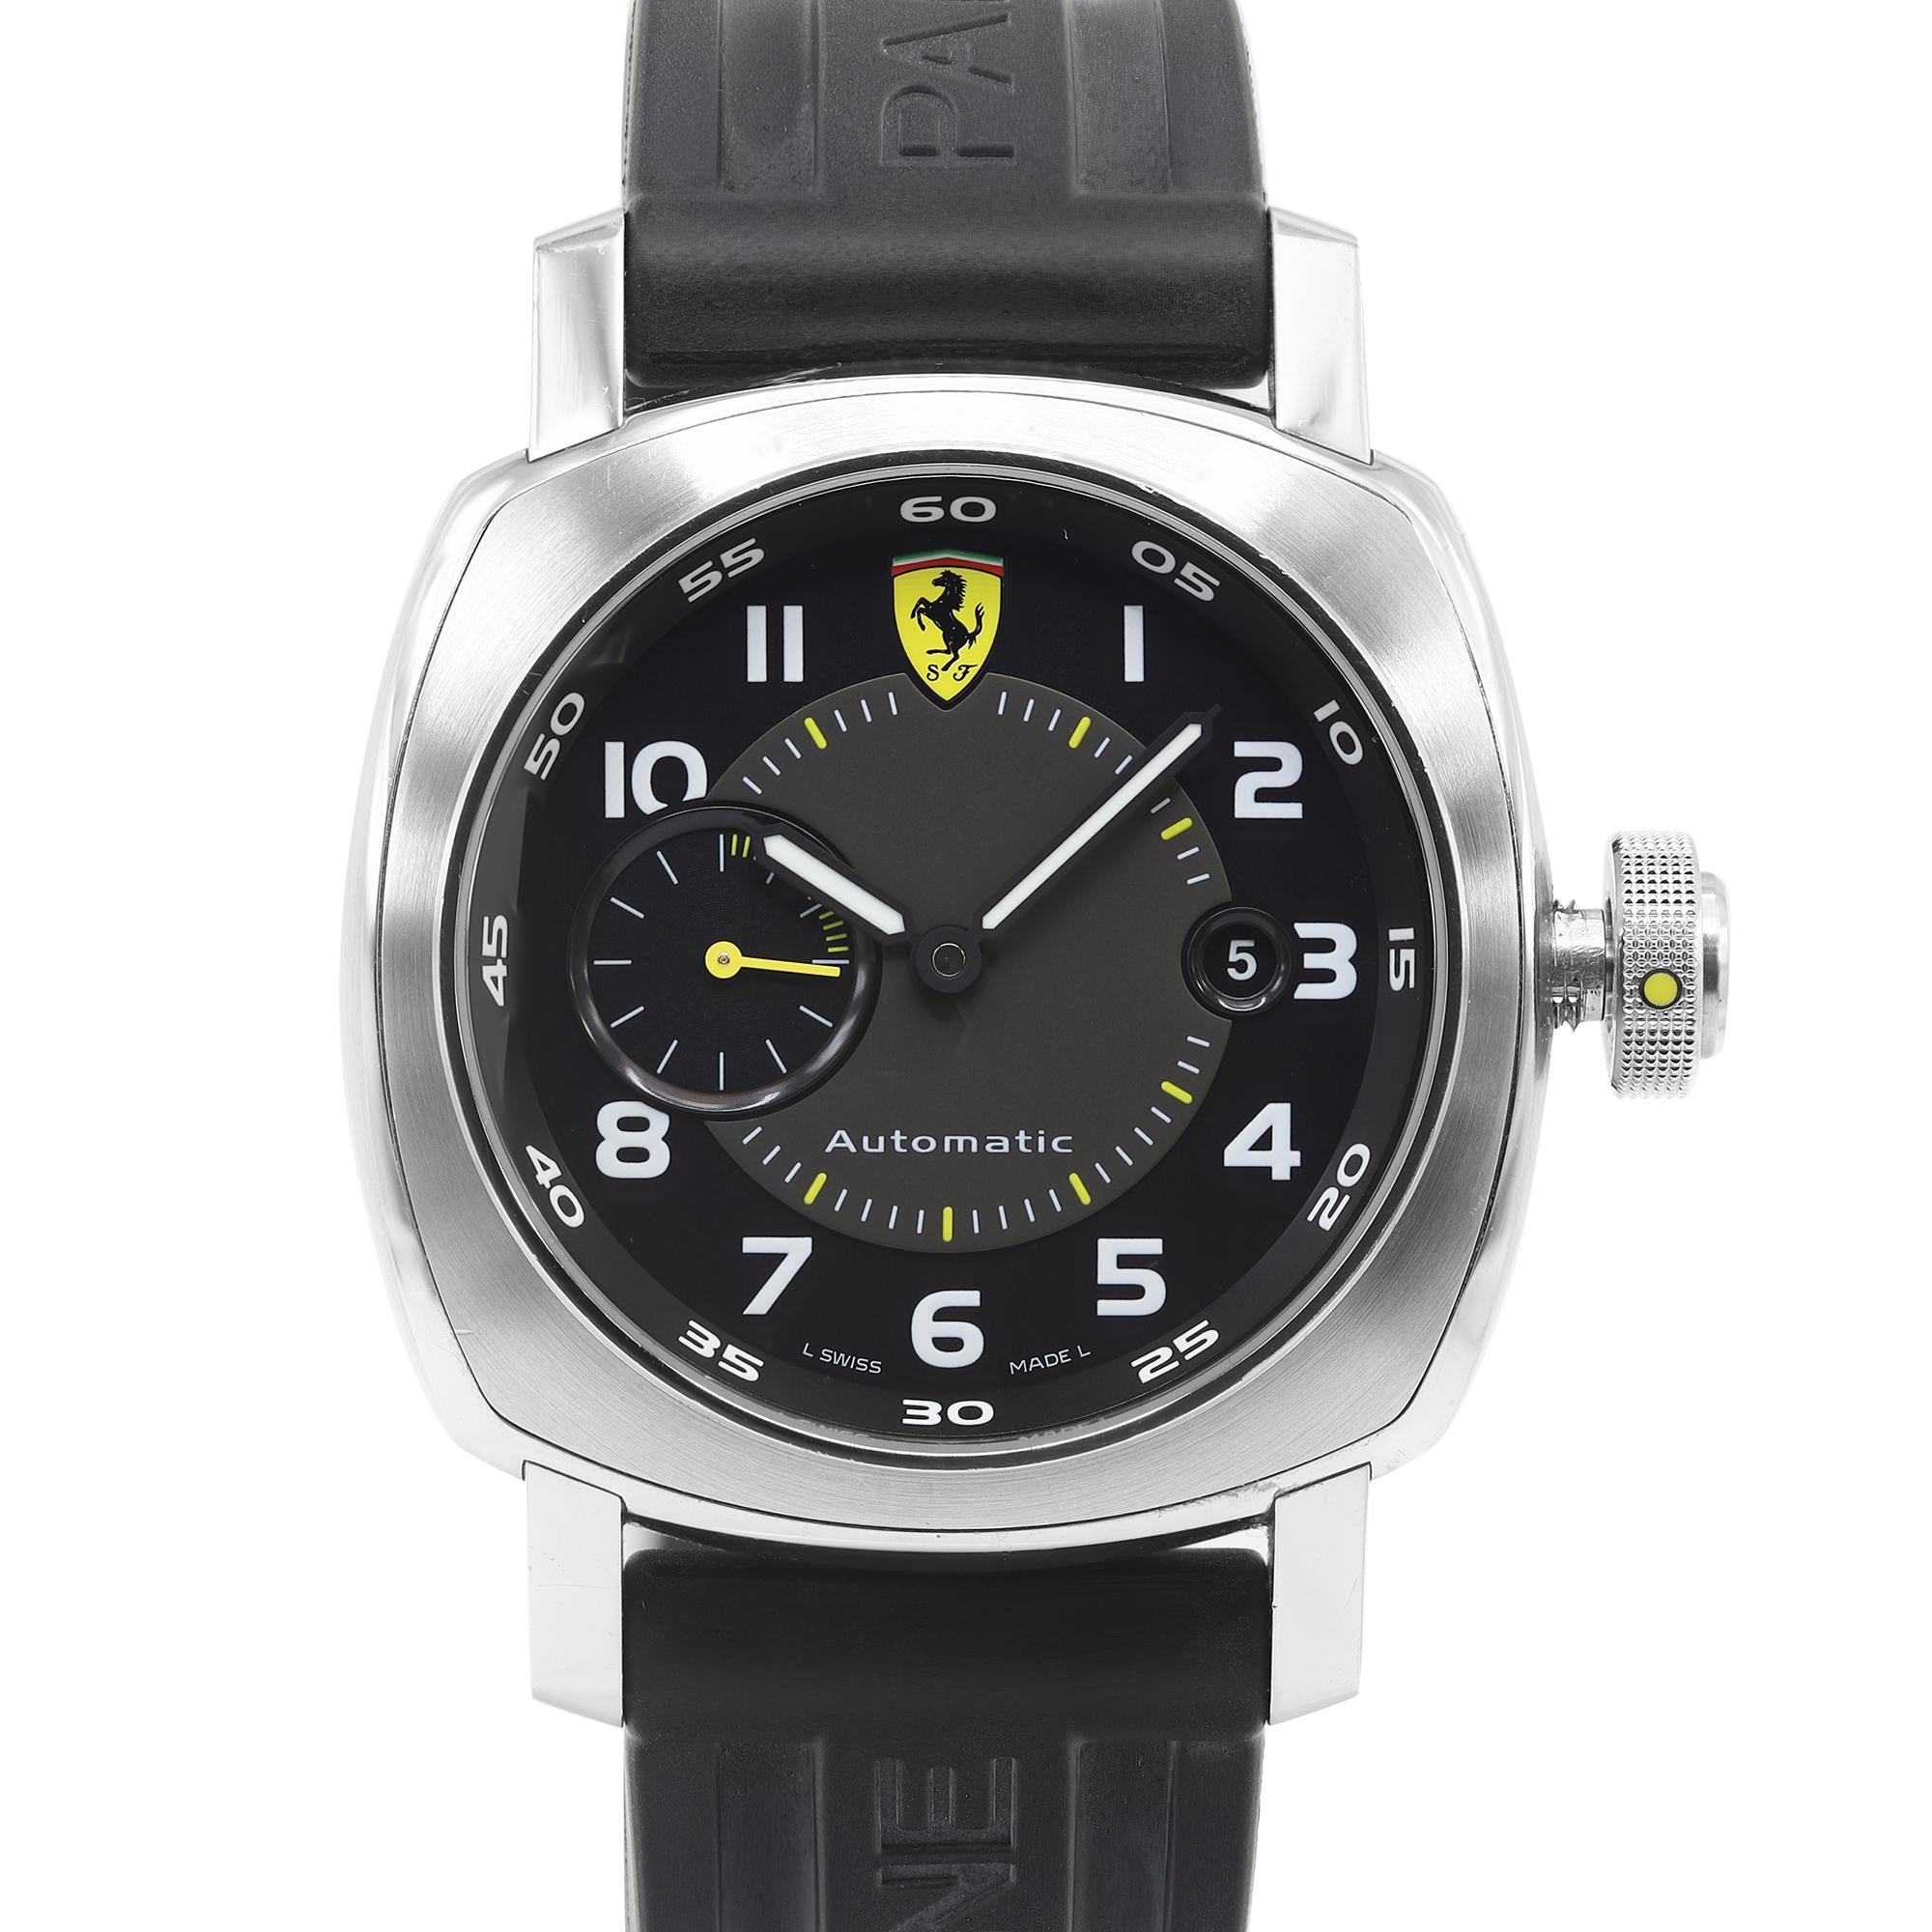 Pre-owned Panerai Ferrari Gran Turismo 45mm Steel Black Dial Automatic Men's Watch F6654.  It comes with an original extra Ferrari Rubber band for Deployment buckle but no buckle is included. Watch has attached the original Panerai band and buckle.